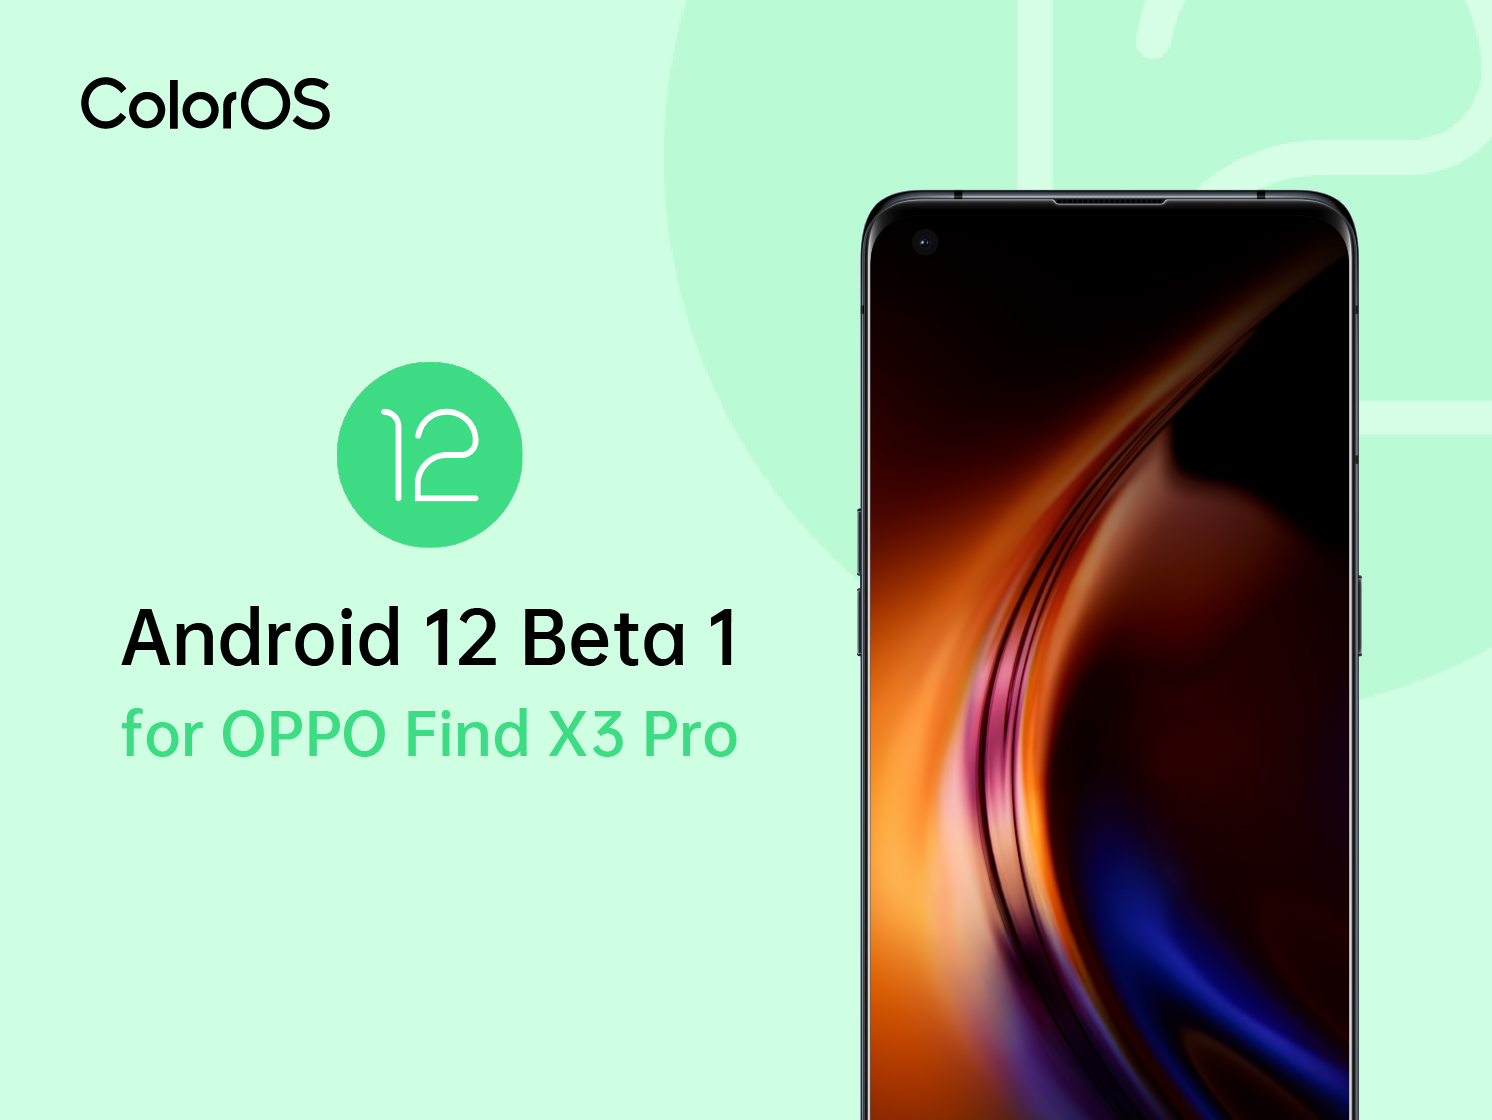 OPPO releases Android 12 Beta on Find X3 Pro | OPPO Global